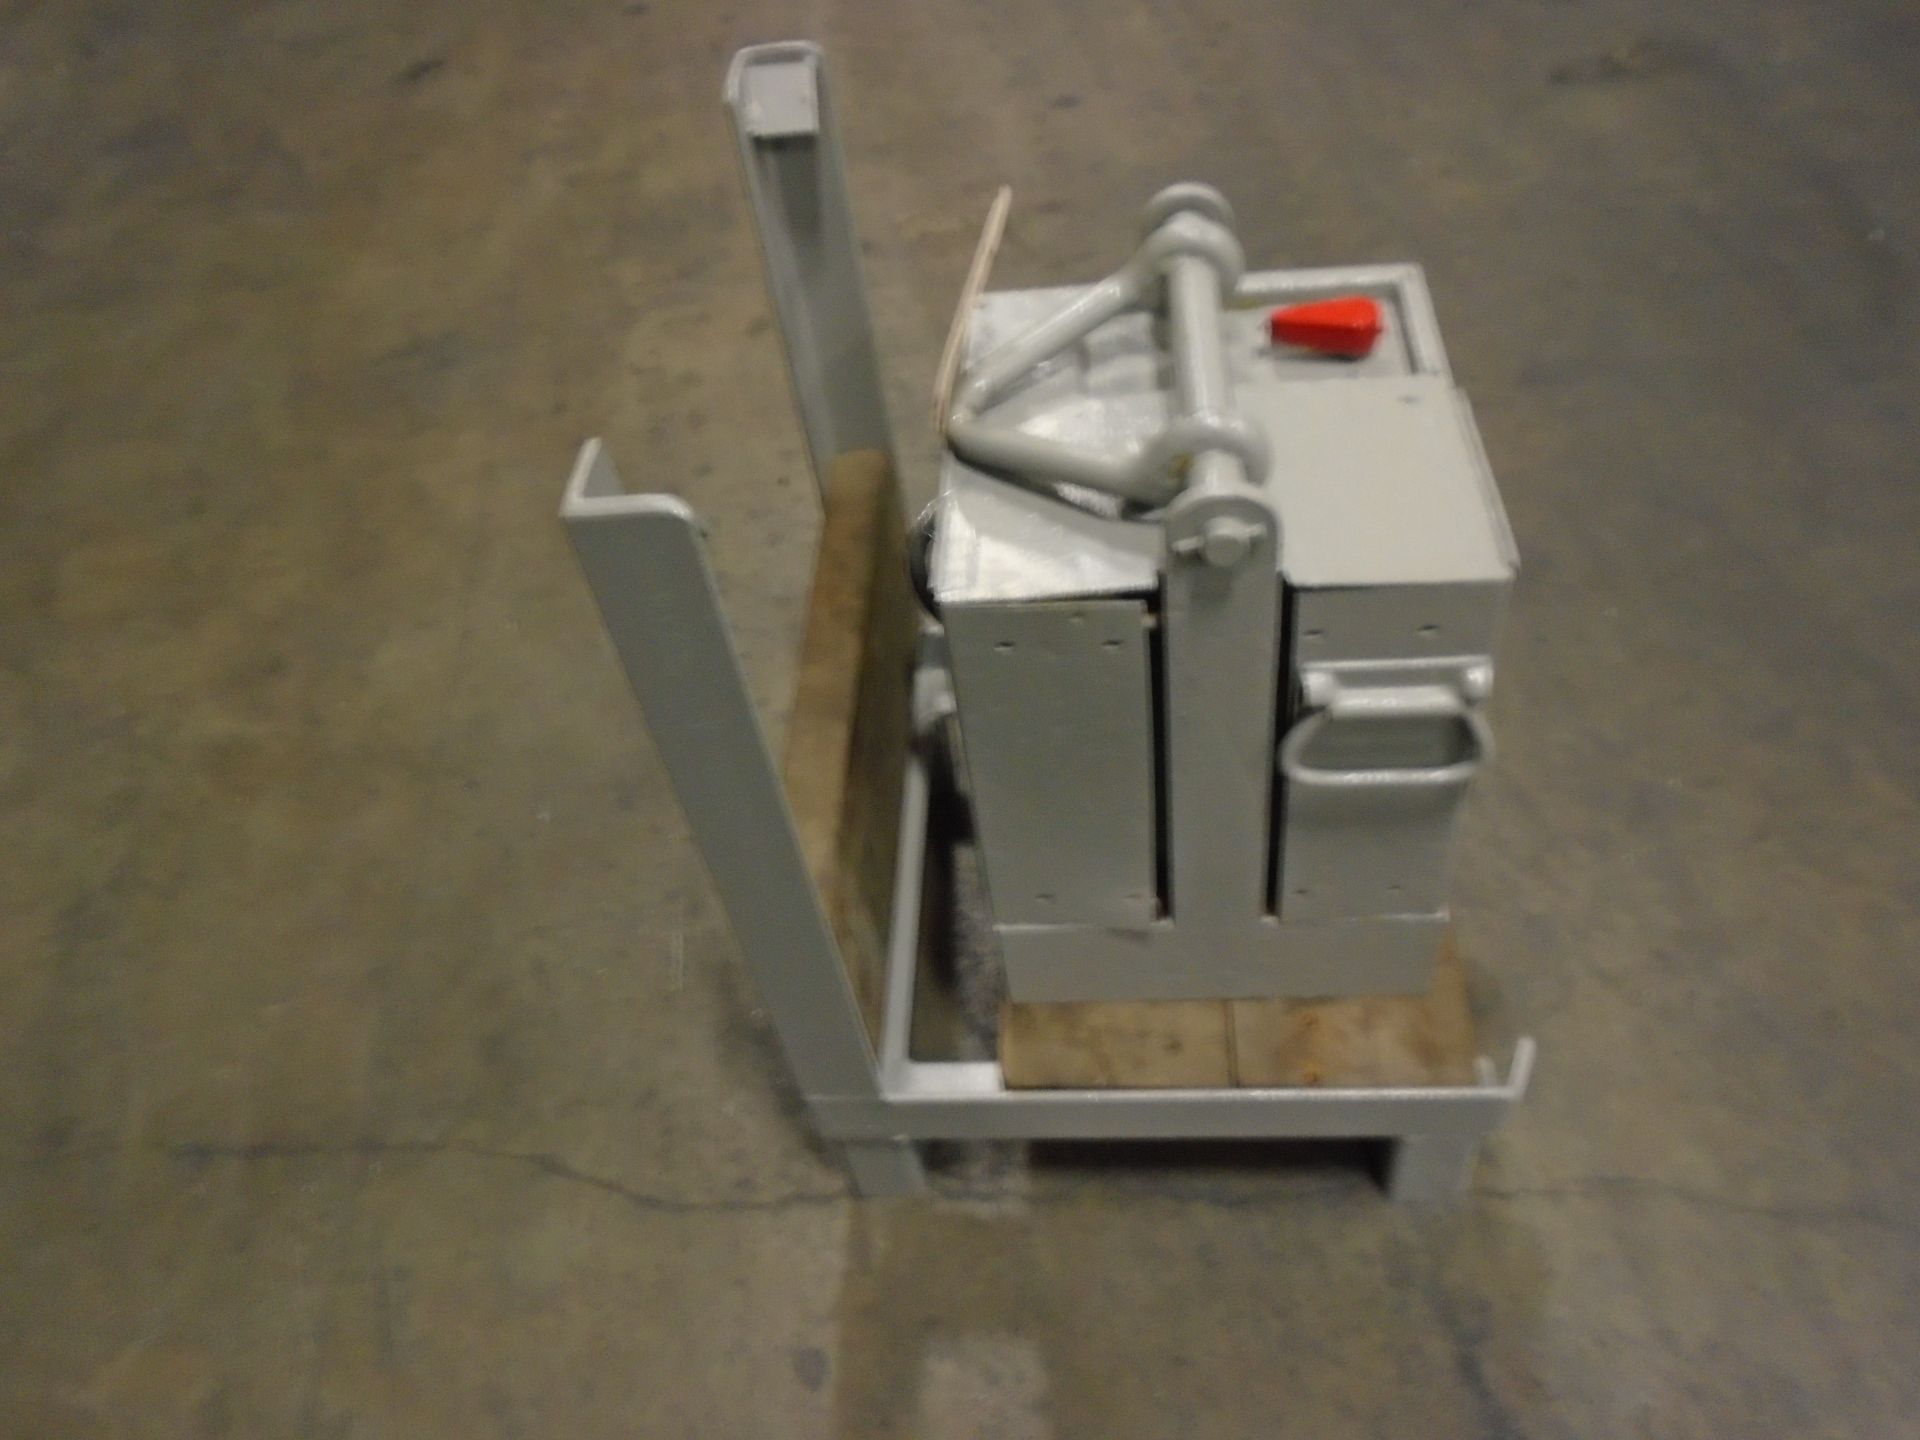 Magnaligt LM-2 Crane Electromagnet 2,500 Lbs. Capacity With Charger 110V Brand New Battery Stand - Image 4 of 7